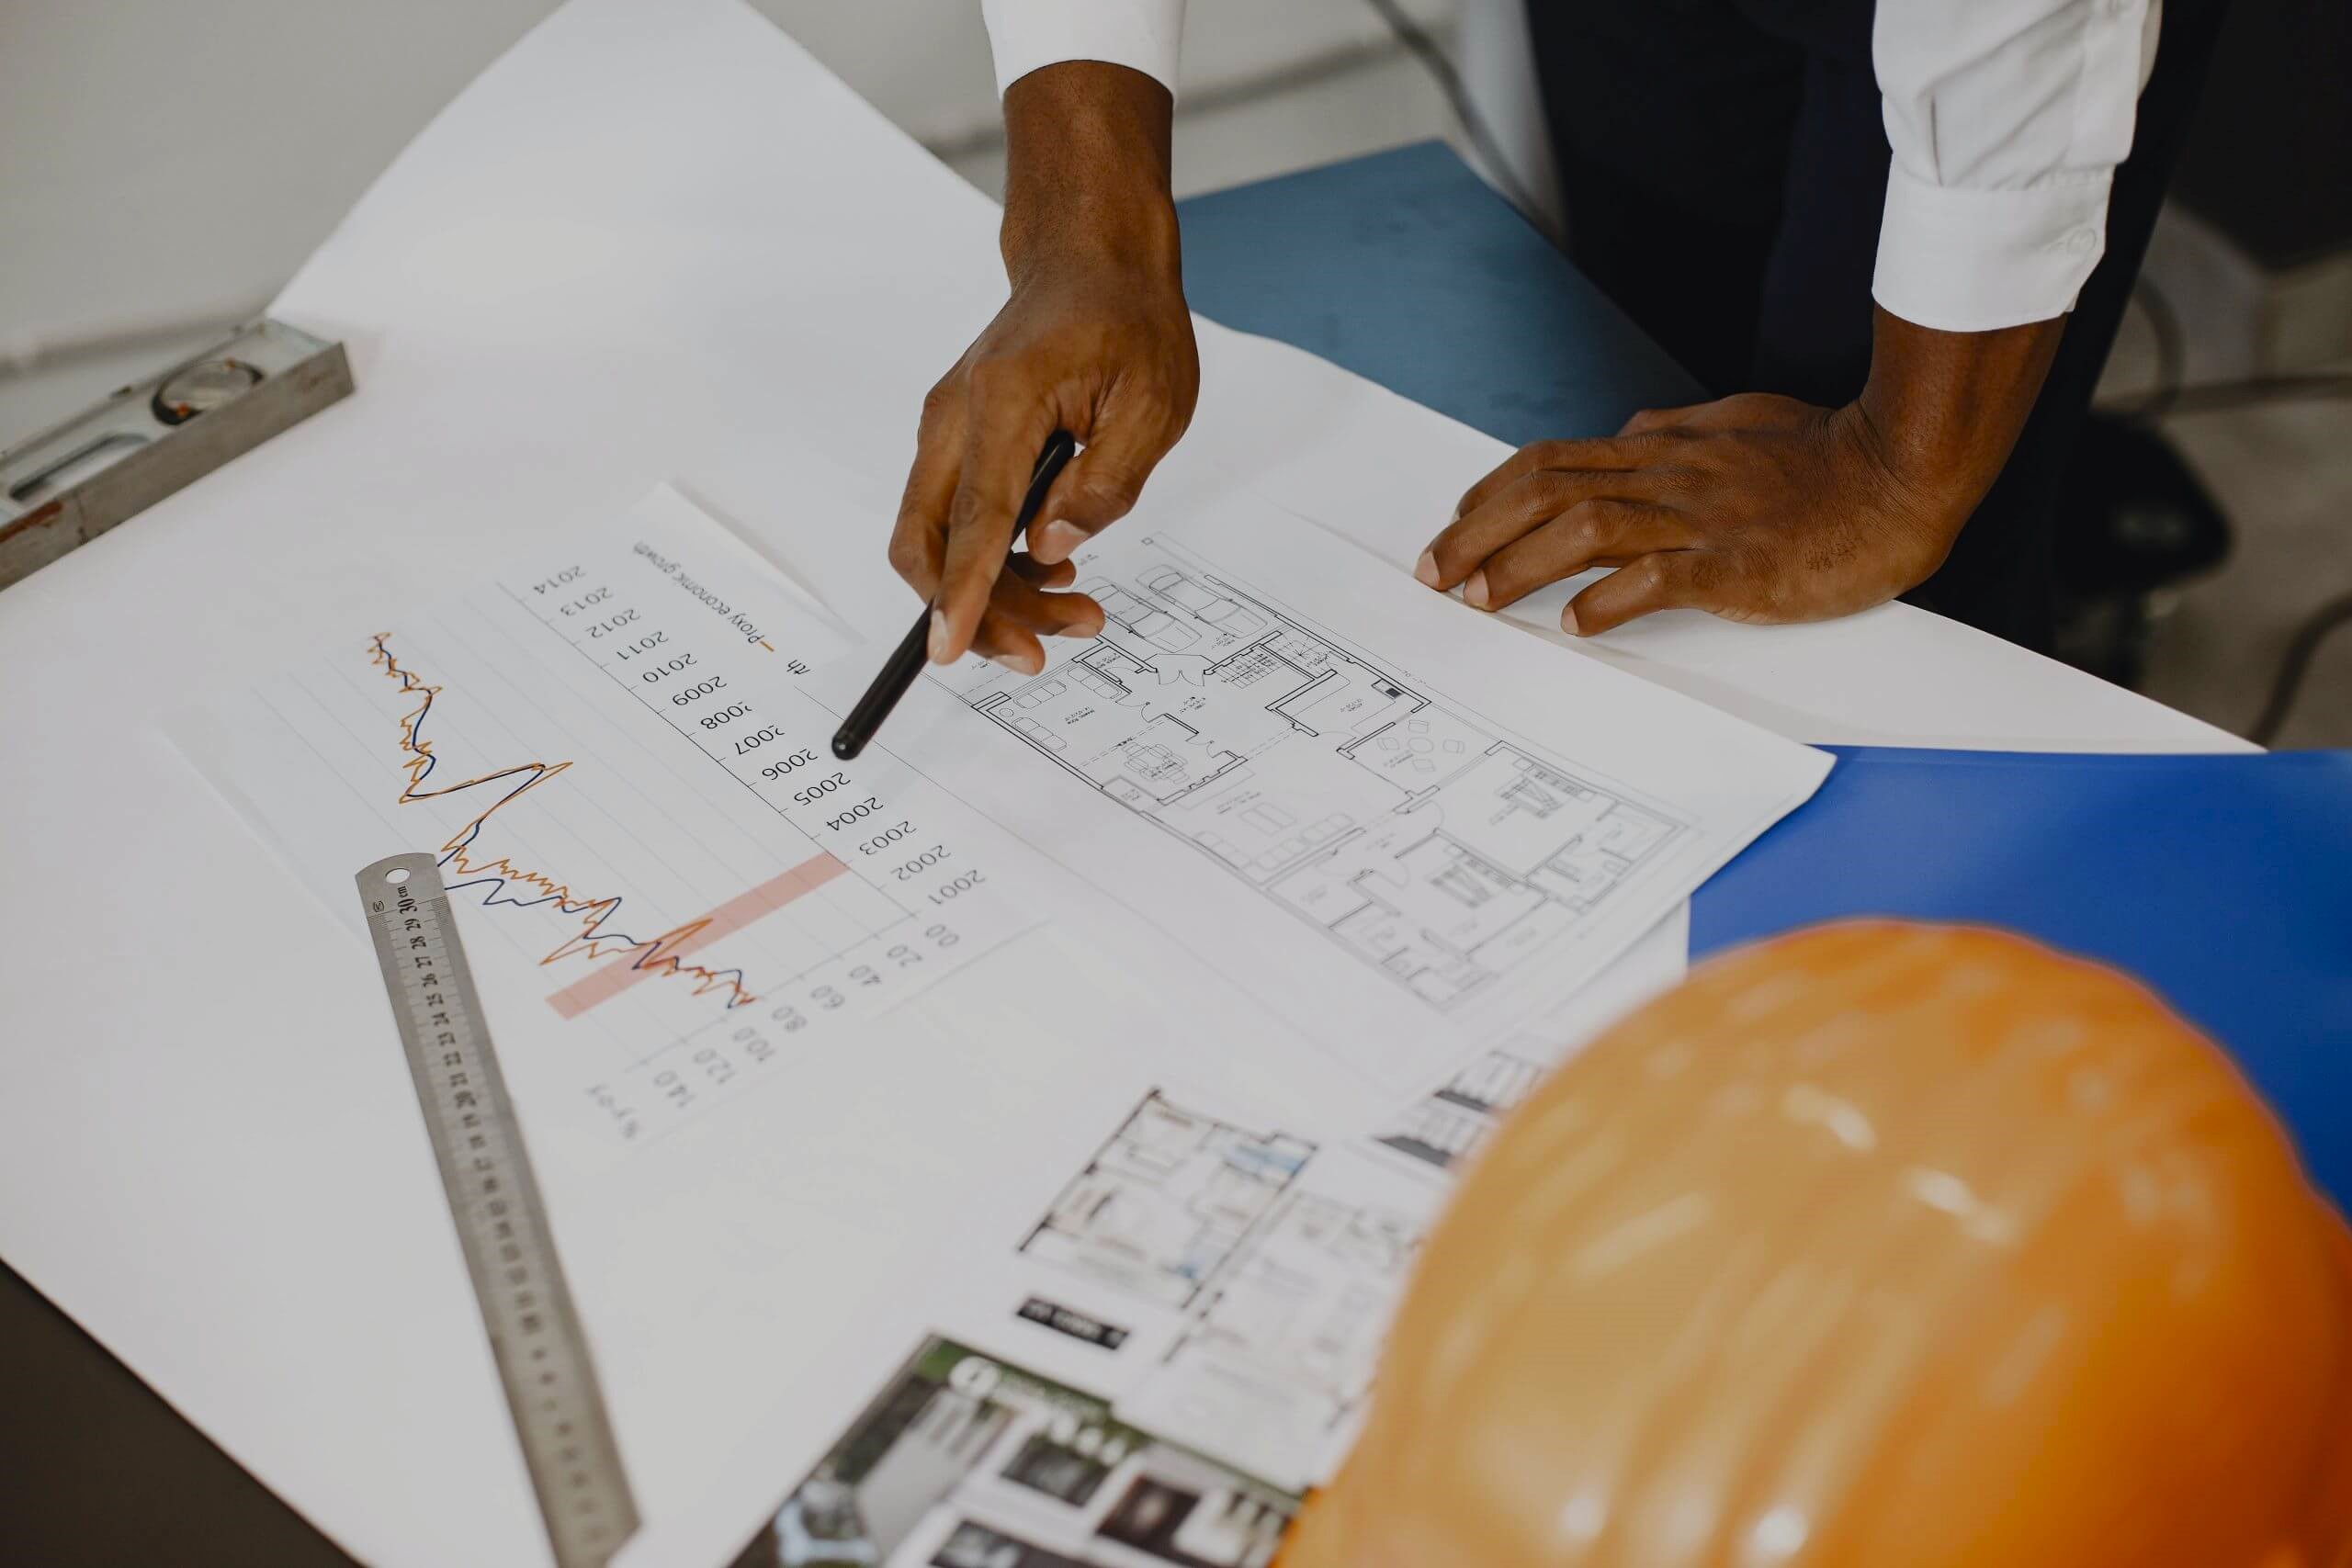 Hands pointing at floorplan on a table with a hard hat next to it